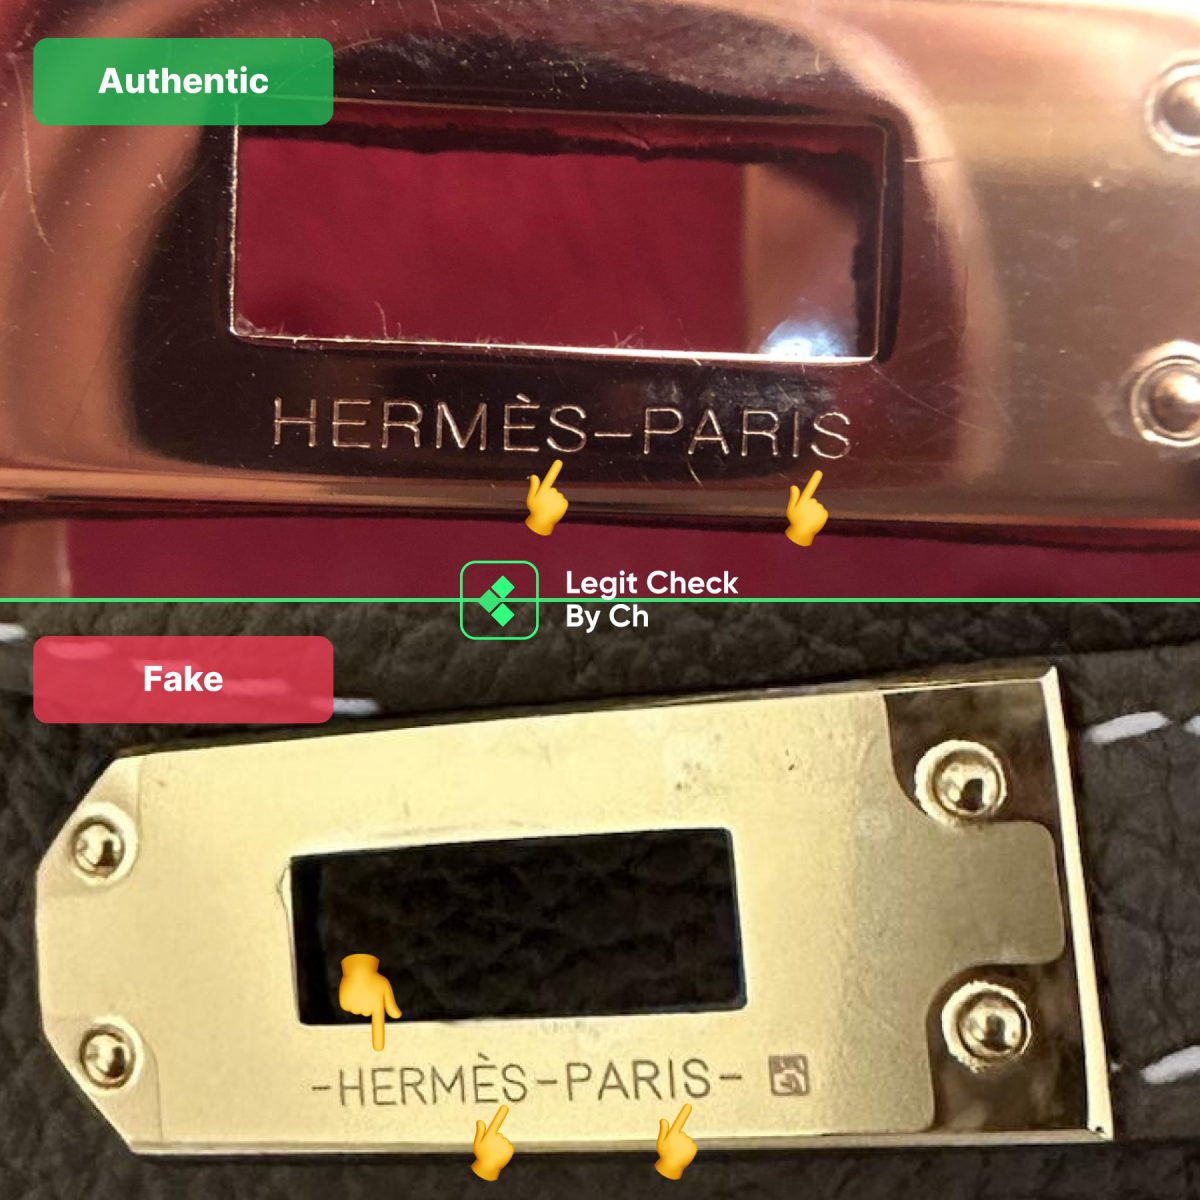 Authentic vs fake comparison of the Hermès Kelly bag's metal plate